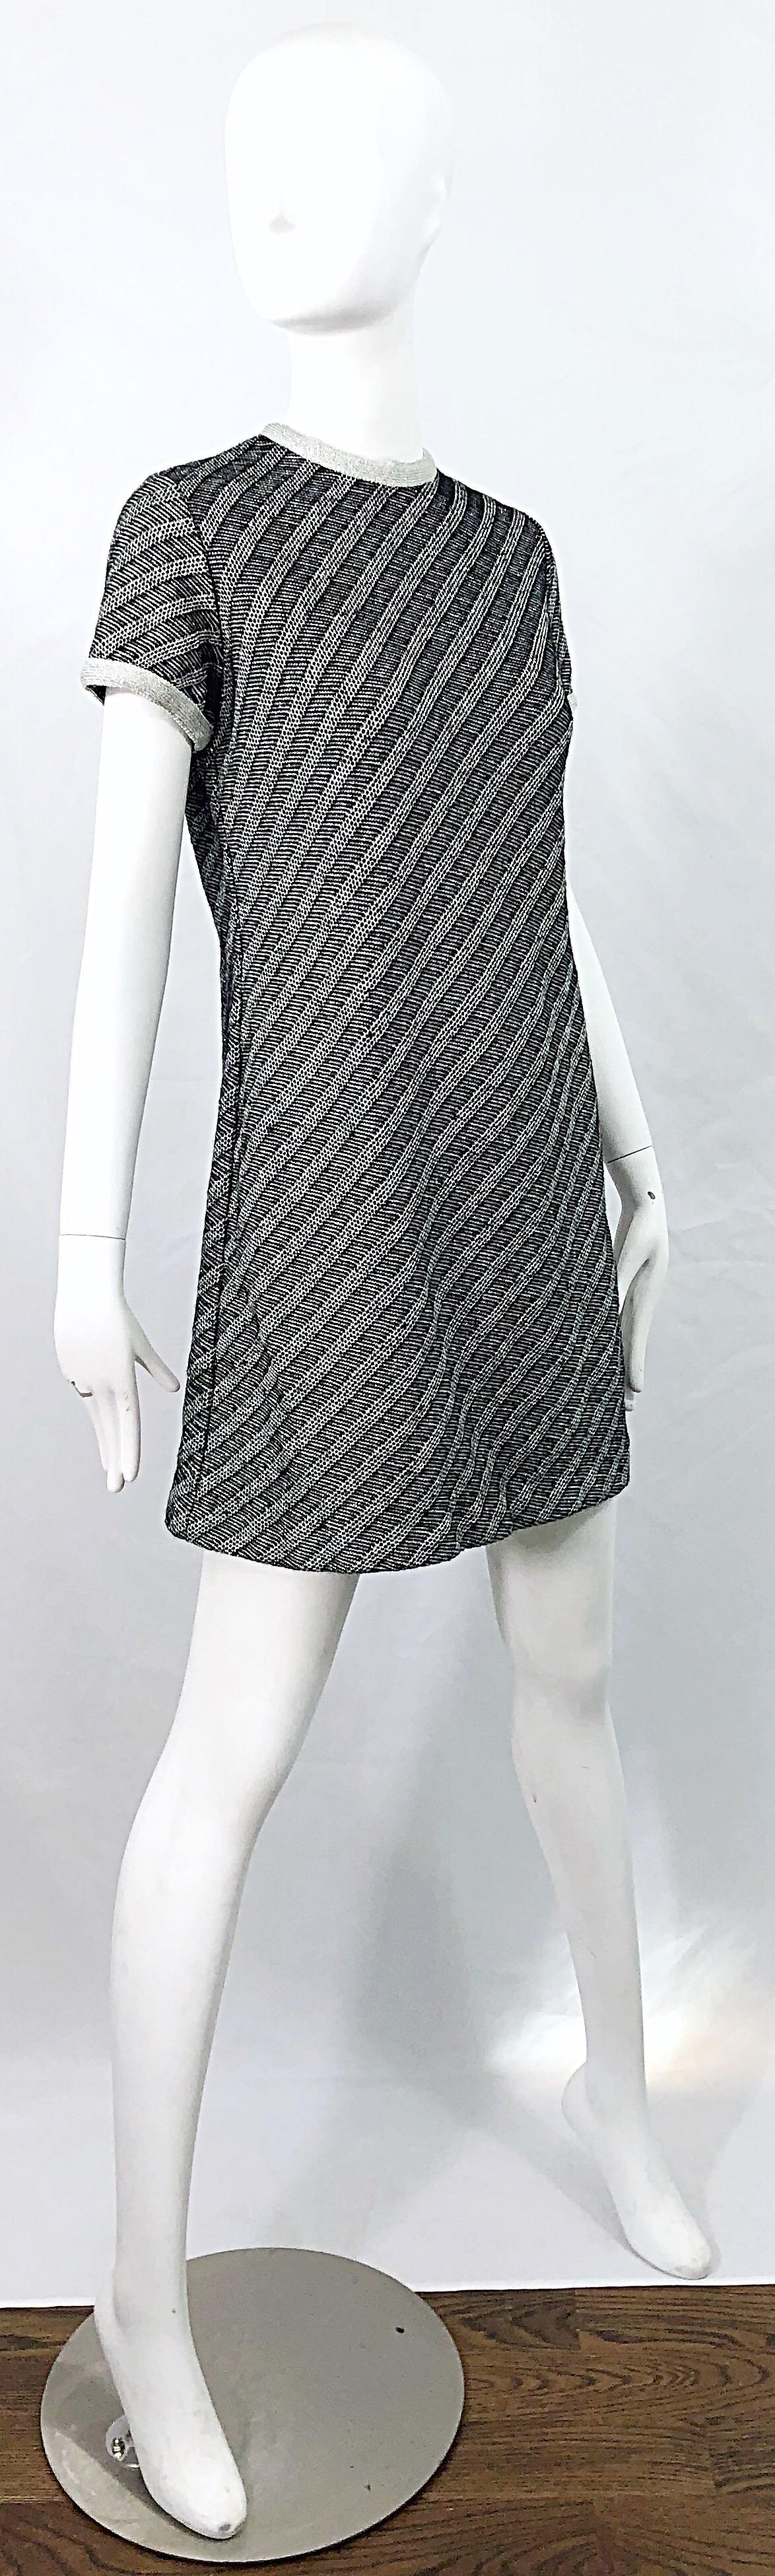 Chic 1960s Black and Silver Metallic Knit Vintage Striped 60s Shift Dress For Sale 5